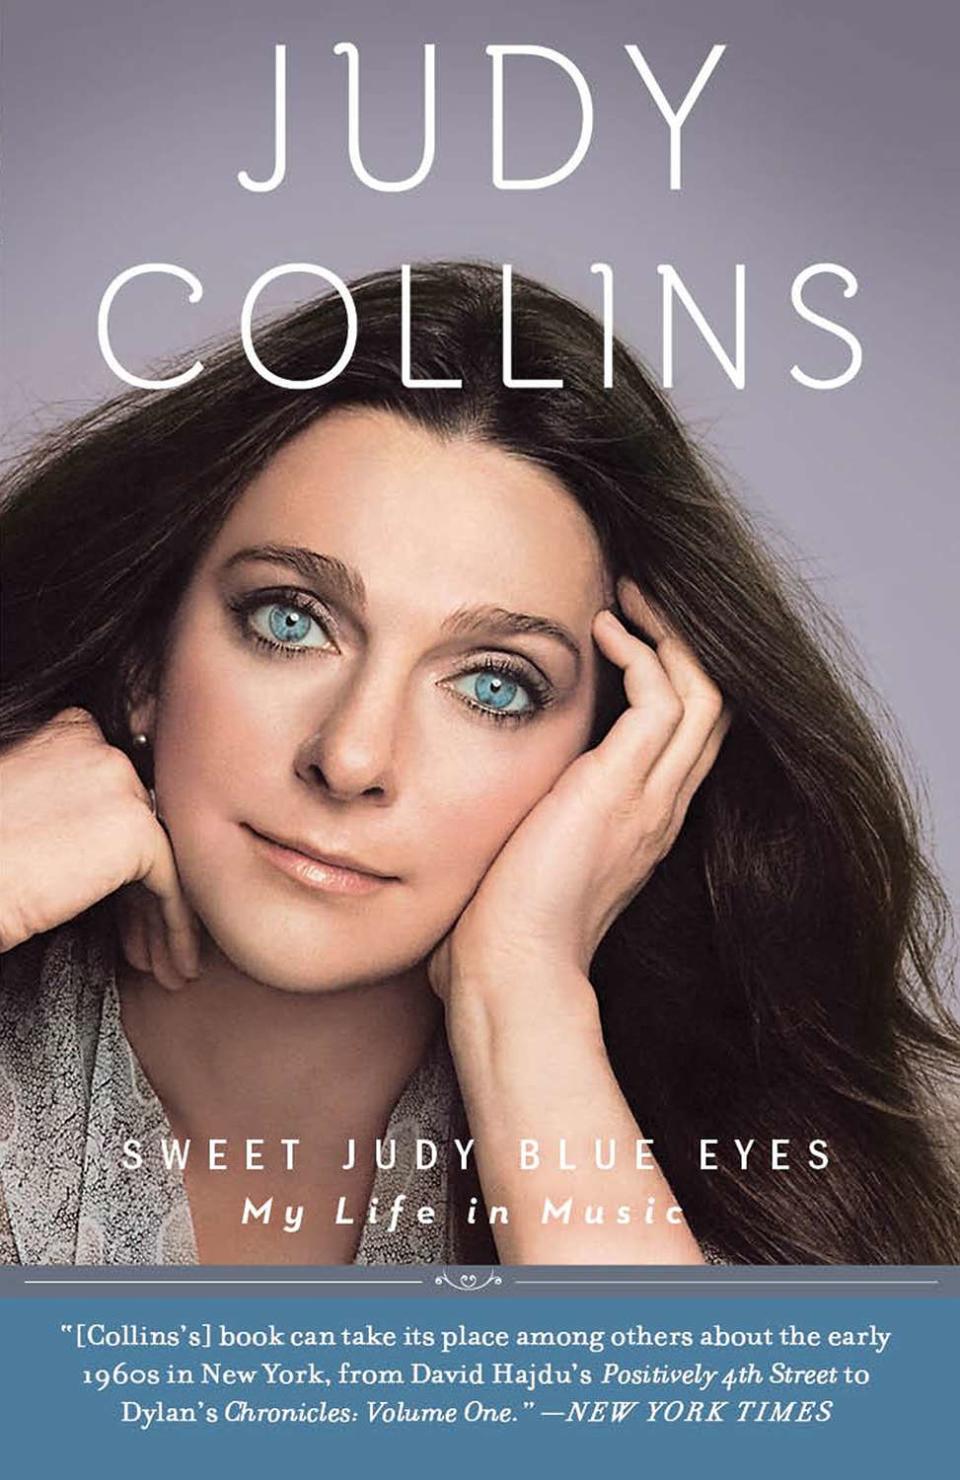 Judy Collins' Published Books